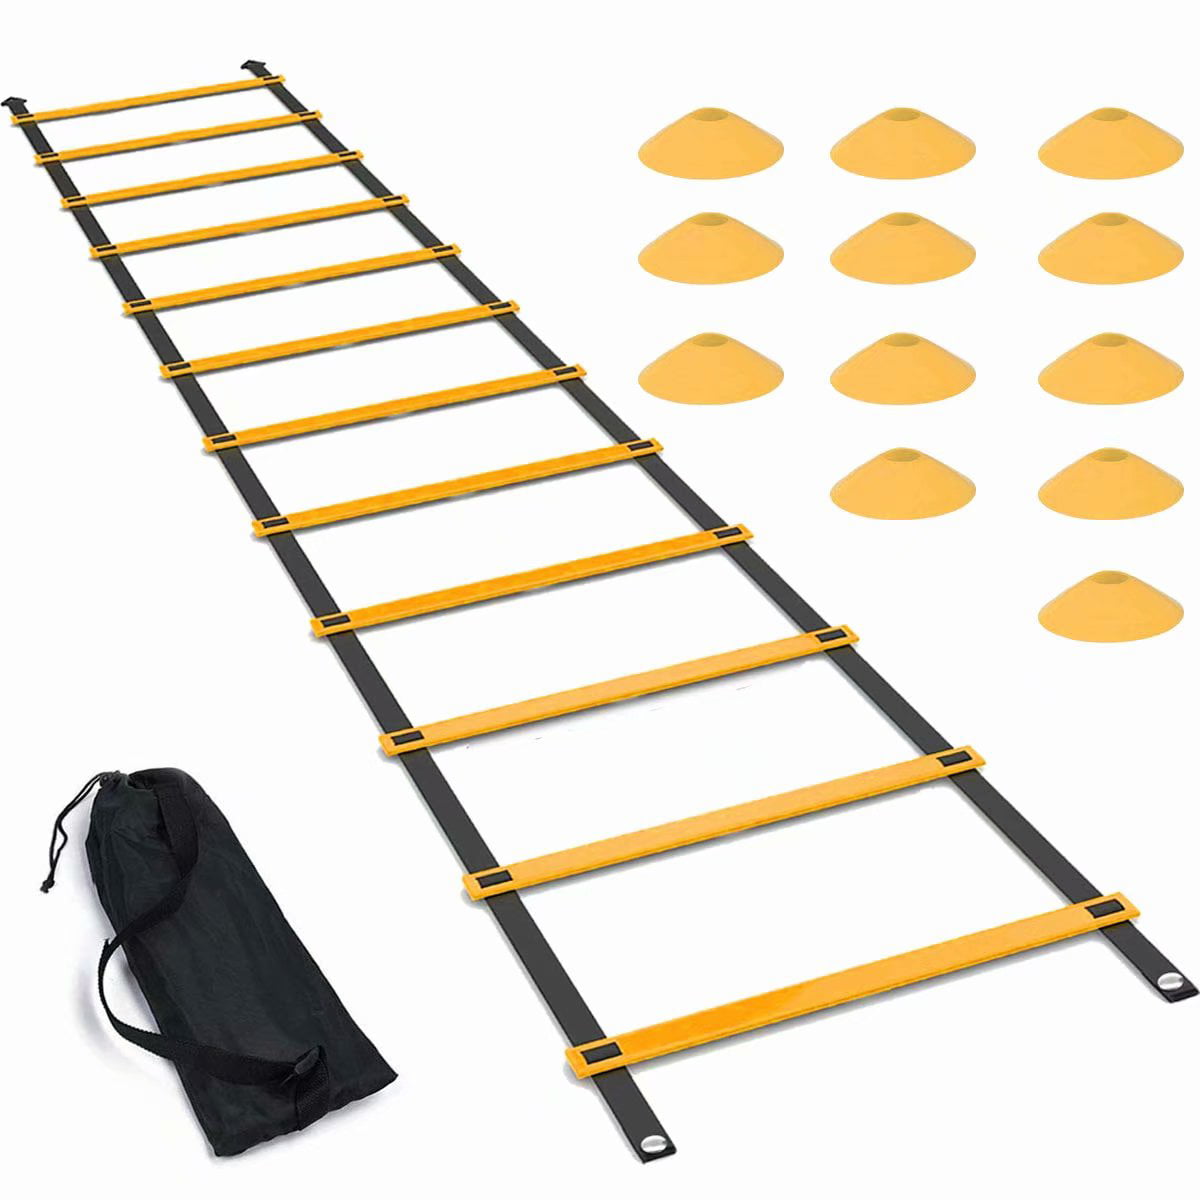 Sports Footwork Training Workout Includes 4 Metal Stakes and Heavy Duty Carry Bag Pro Agility Ladder and Cones 15 ft Fixed-Rung Speed Ladder with 12 Disc Cones for Soccer Exercise Football 